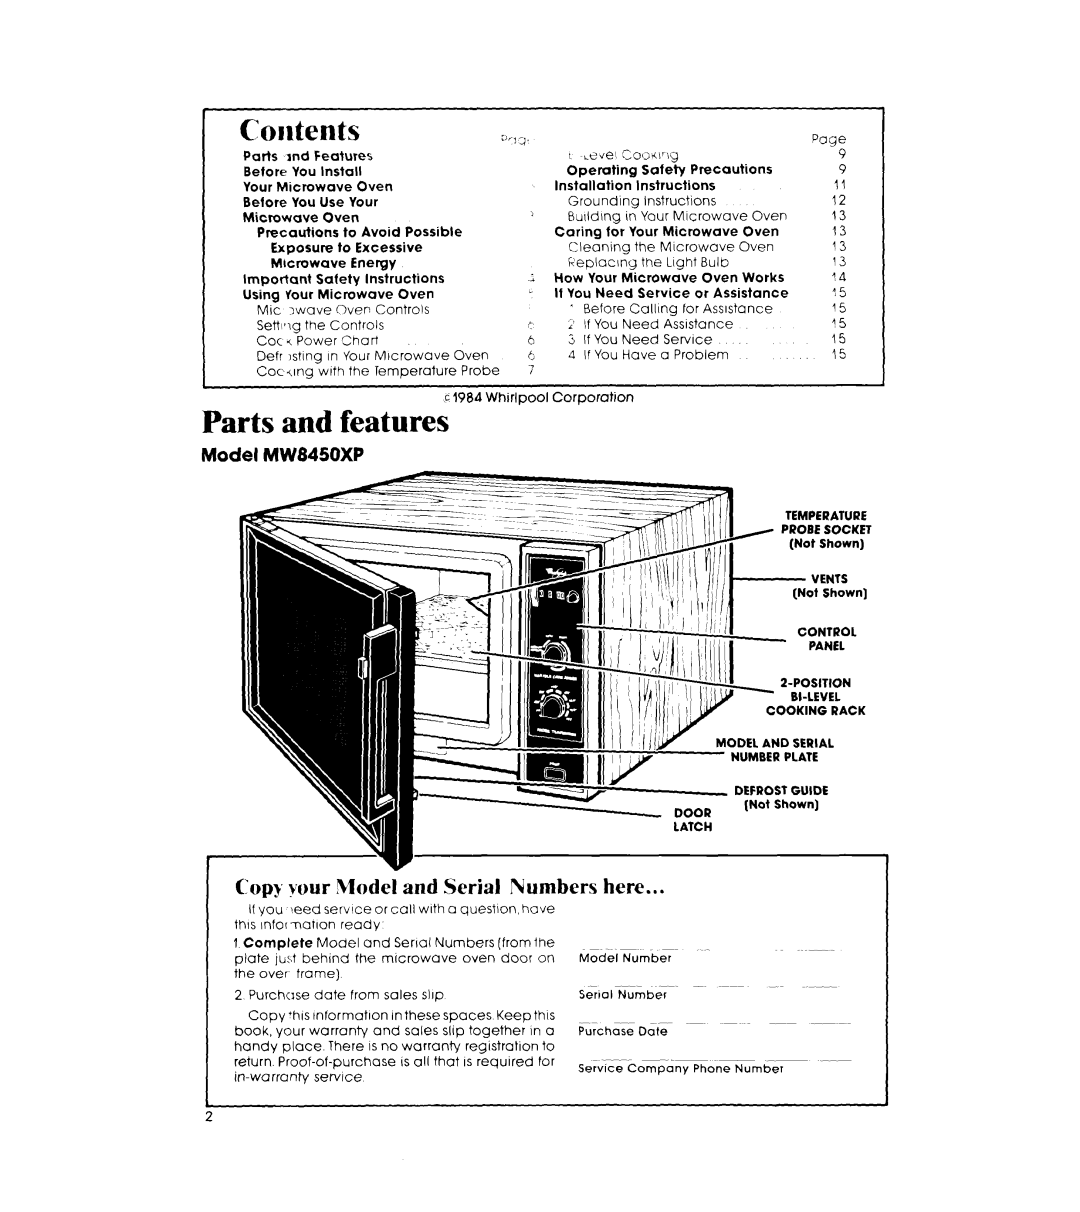 Whirlpool manual Contents, Parts, Copy your ,ModeI and Serial Numbers here, Model MW8450XP, and features 